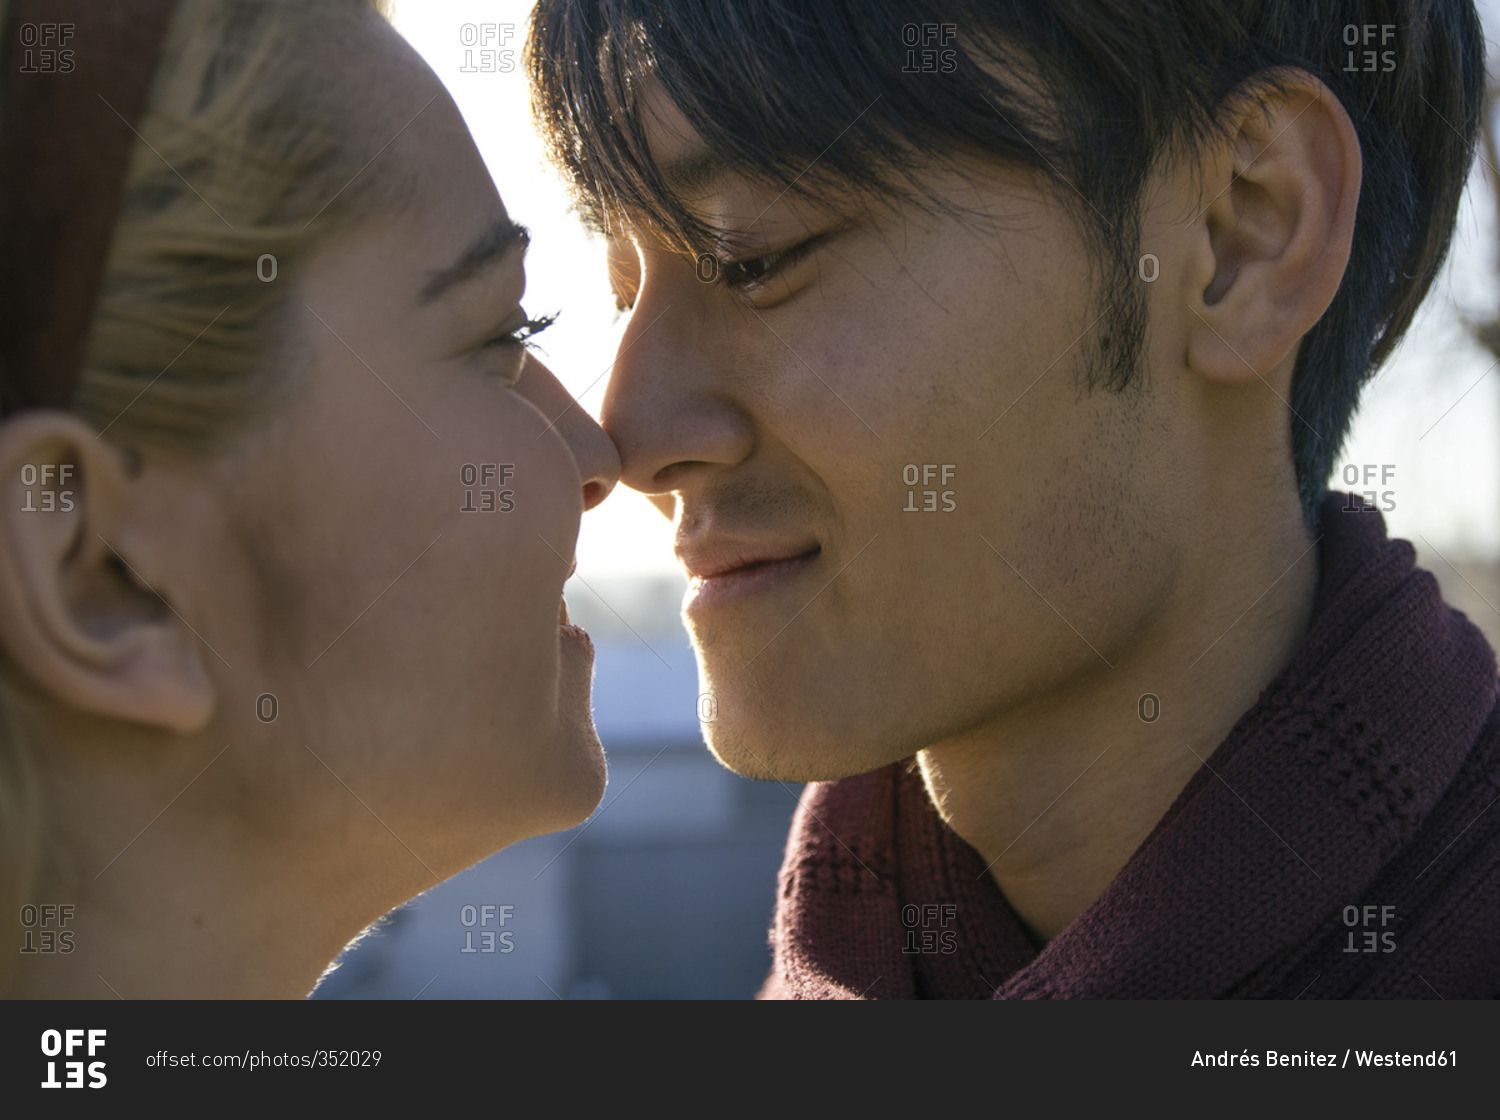 Young man touching nose of his girlfriend with his nose